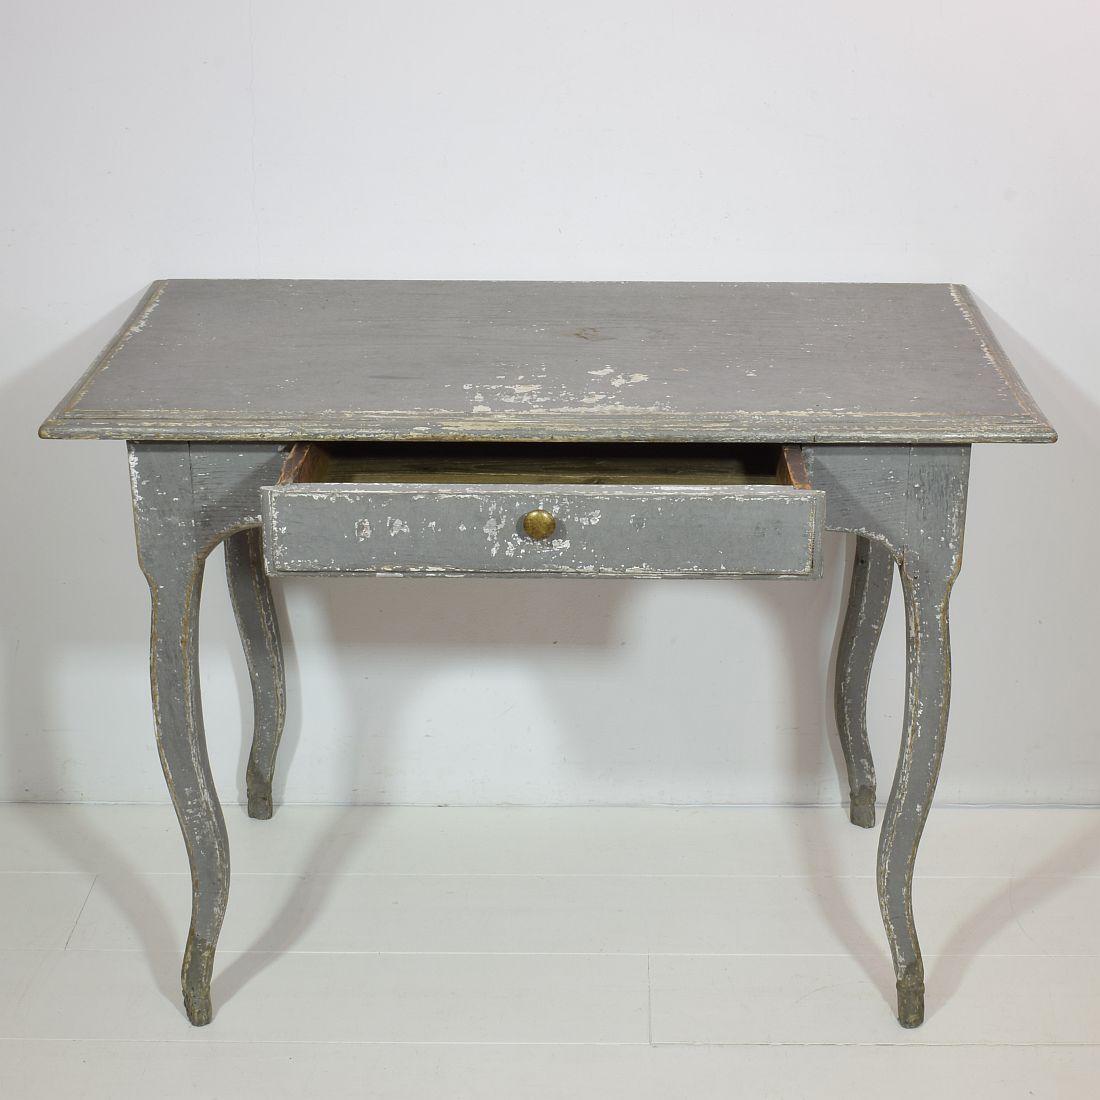 Hand-Crafted French 18th Century Painted Louis XV Table / Small Desk